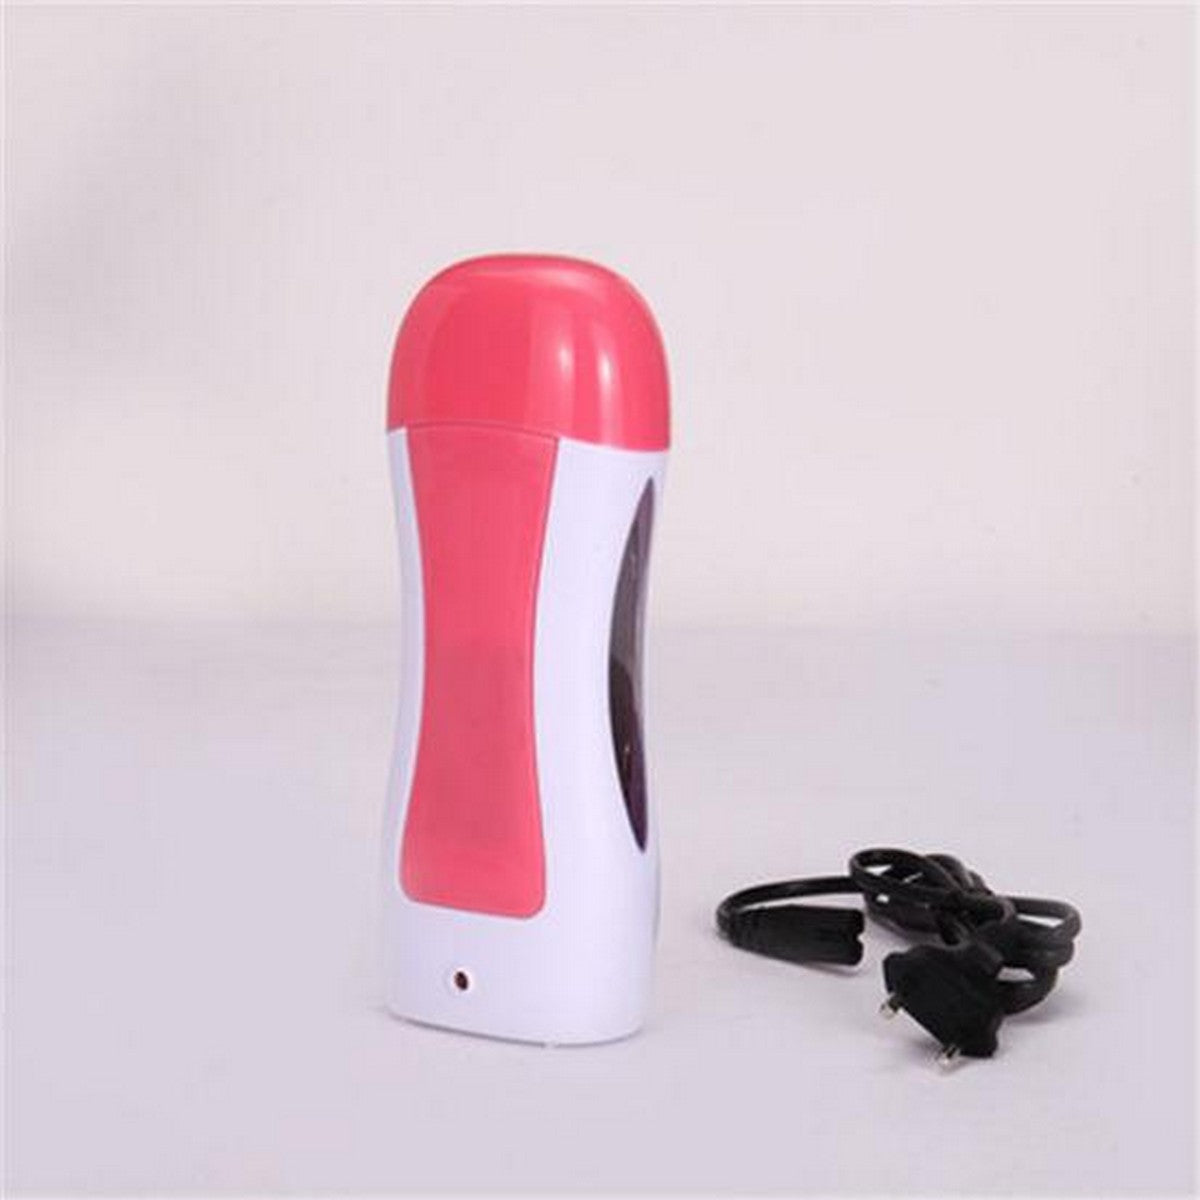 Electric Depilatory Roll On Wax Heater Roller Hair Removal (only machine)